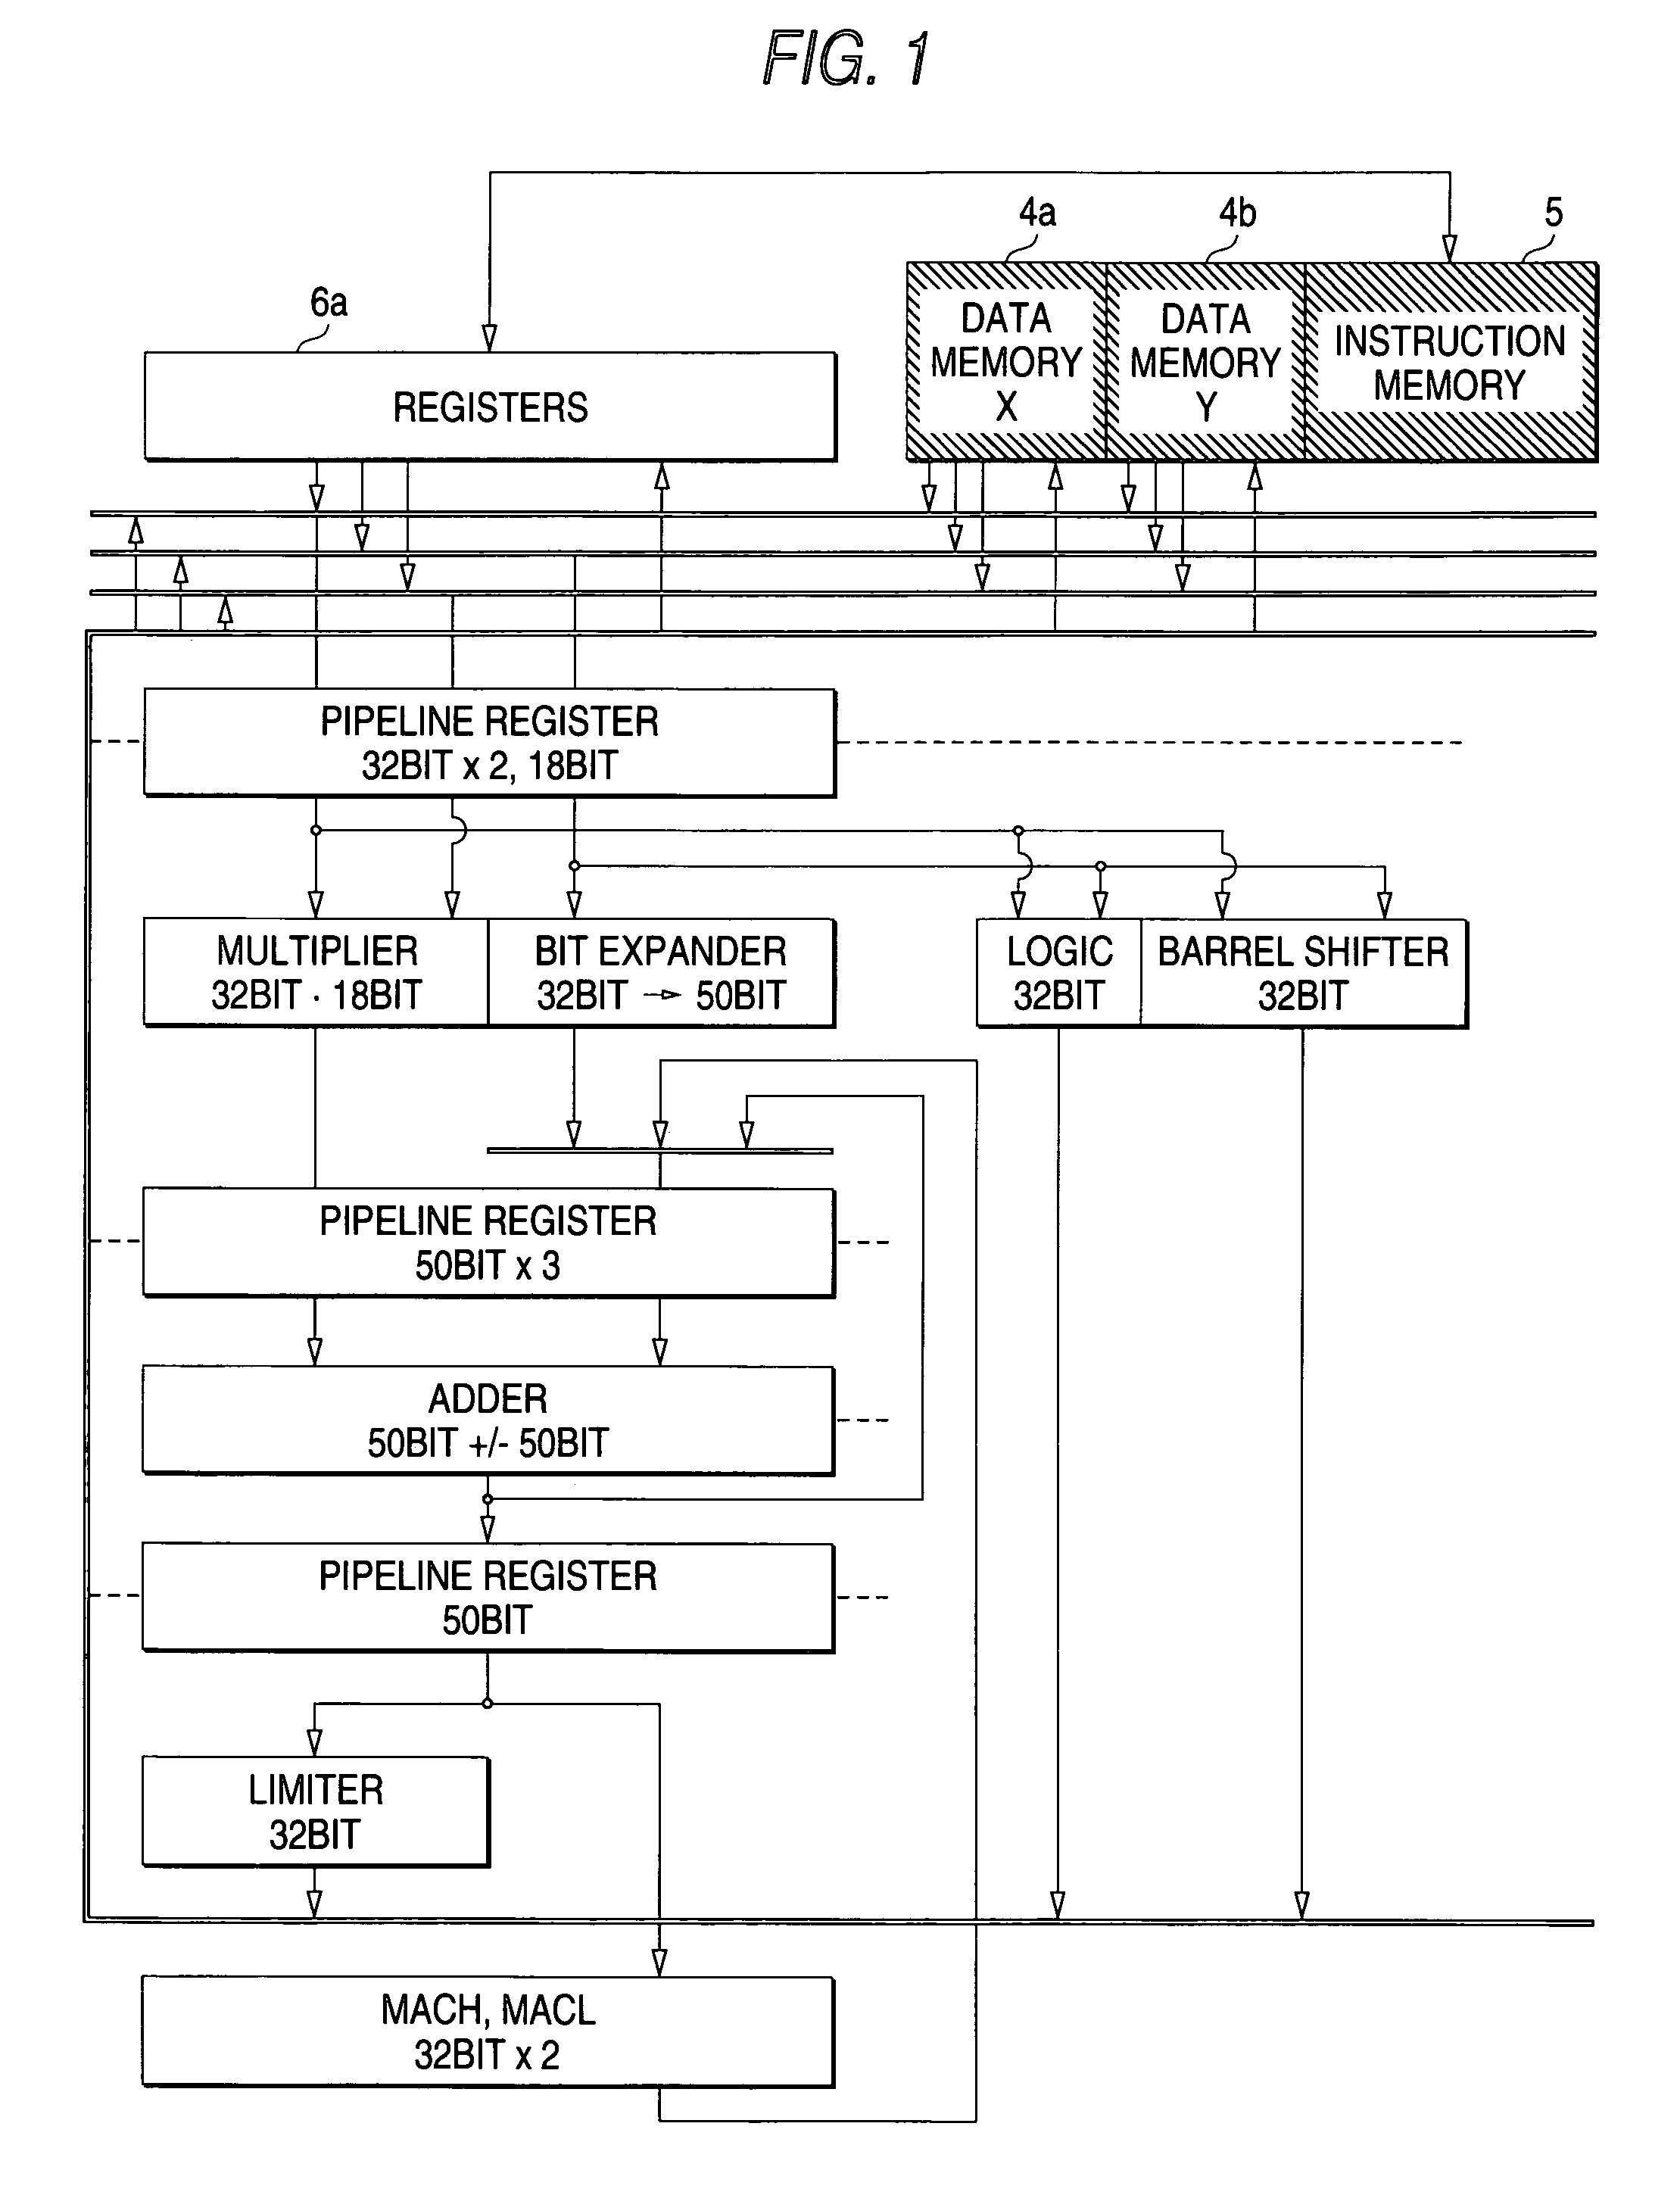 Digital signal processor including an interface therein capable of allowing direct access to registers from an external device